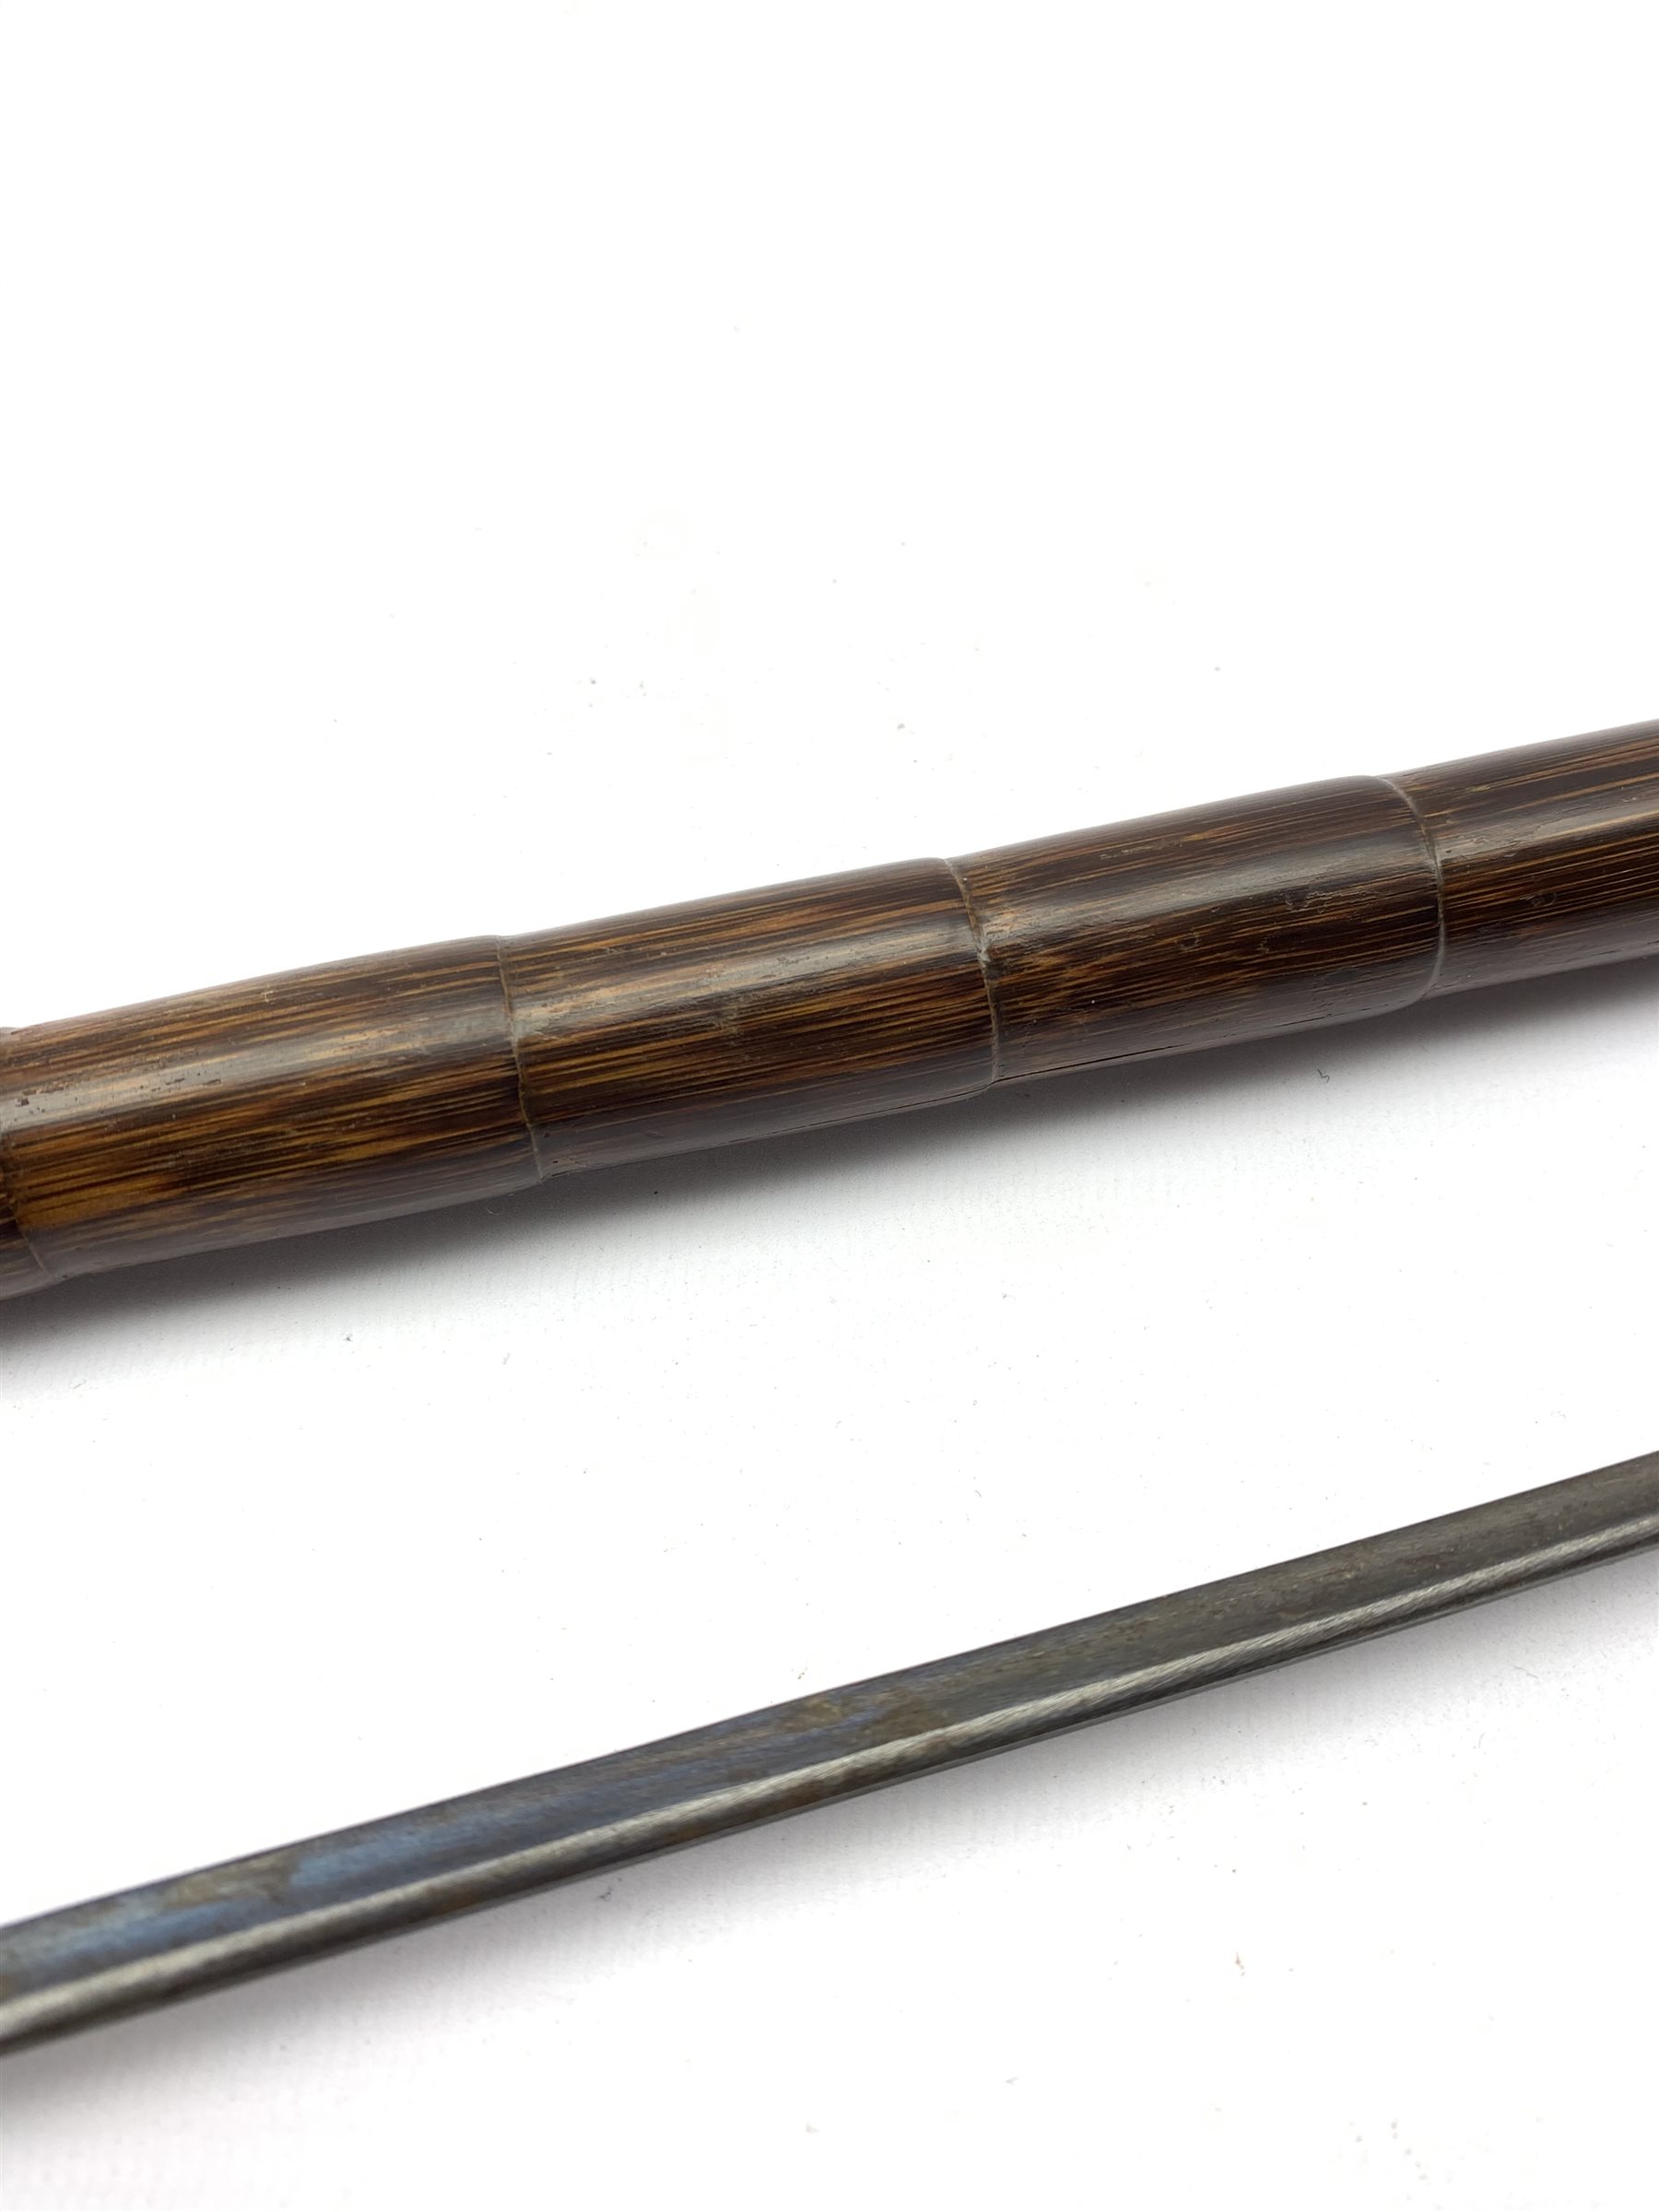 Early 20th century Partridge wood sword stick with stylized Alpacca silver curved handle and steel b - Image 6 of 7